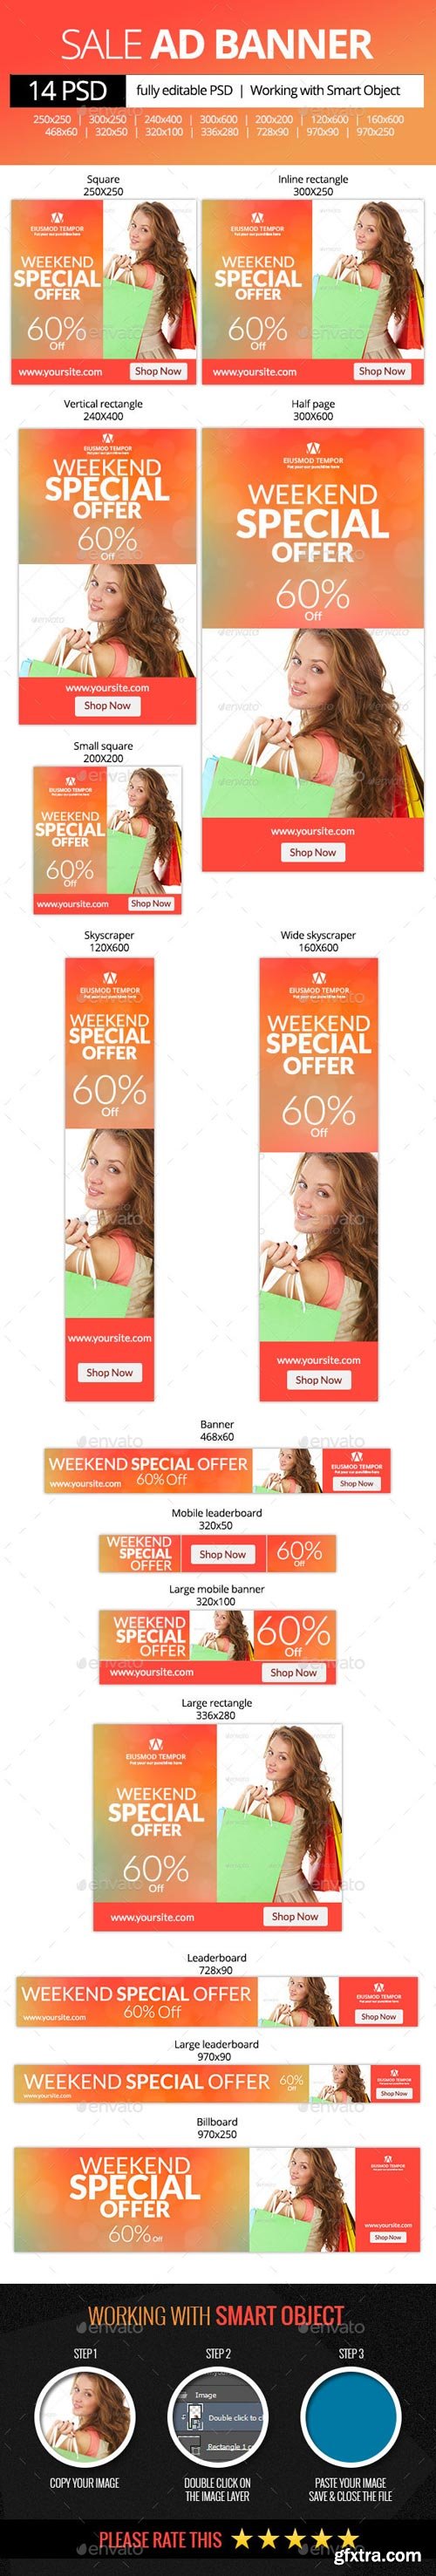 GraphicRiver - Weekend Special Offer Web Banners - 10254782